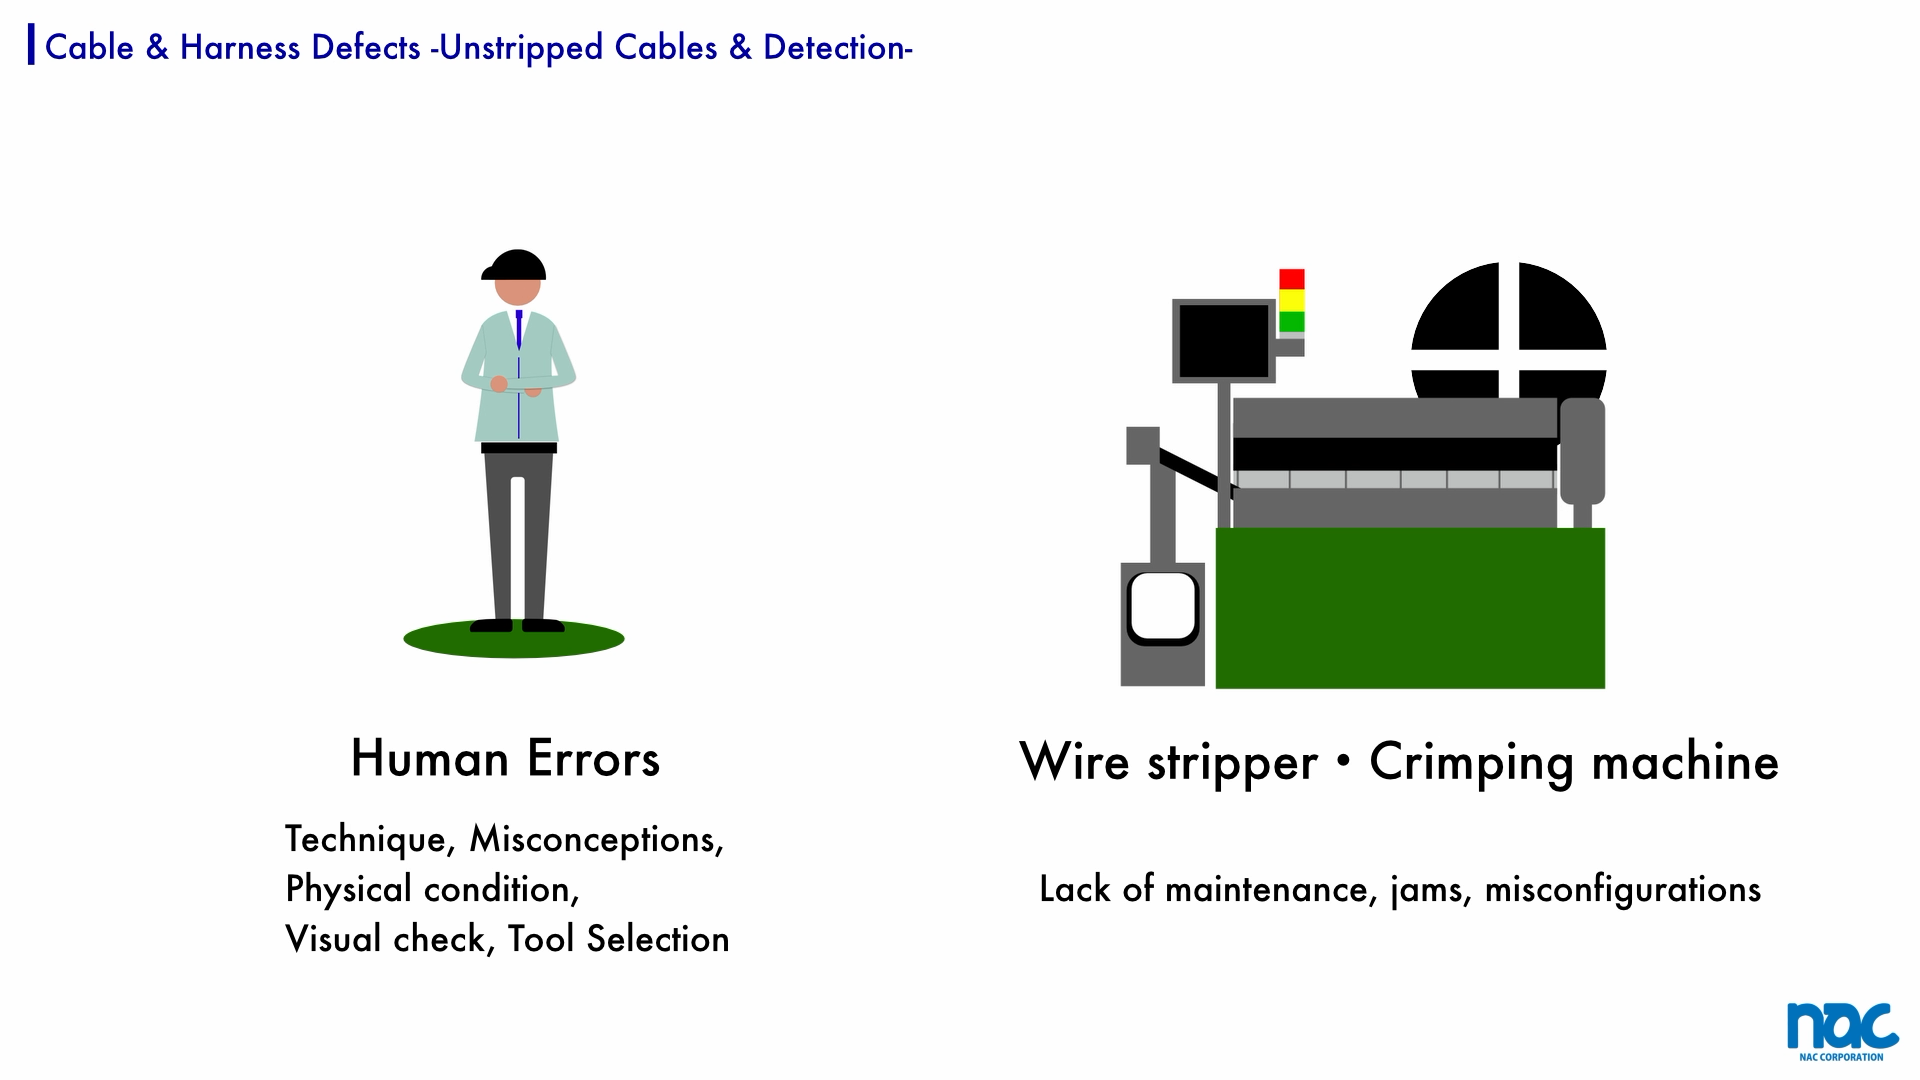  Unstripped is caused by human error such as technique, misunderstanding, physical condition, tool selection error, jamming of automatic crimpers, and setting error.